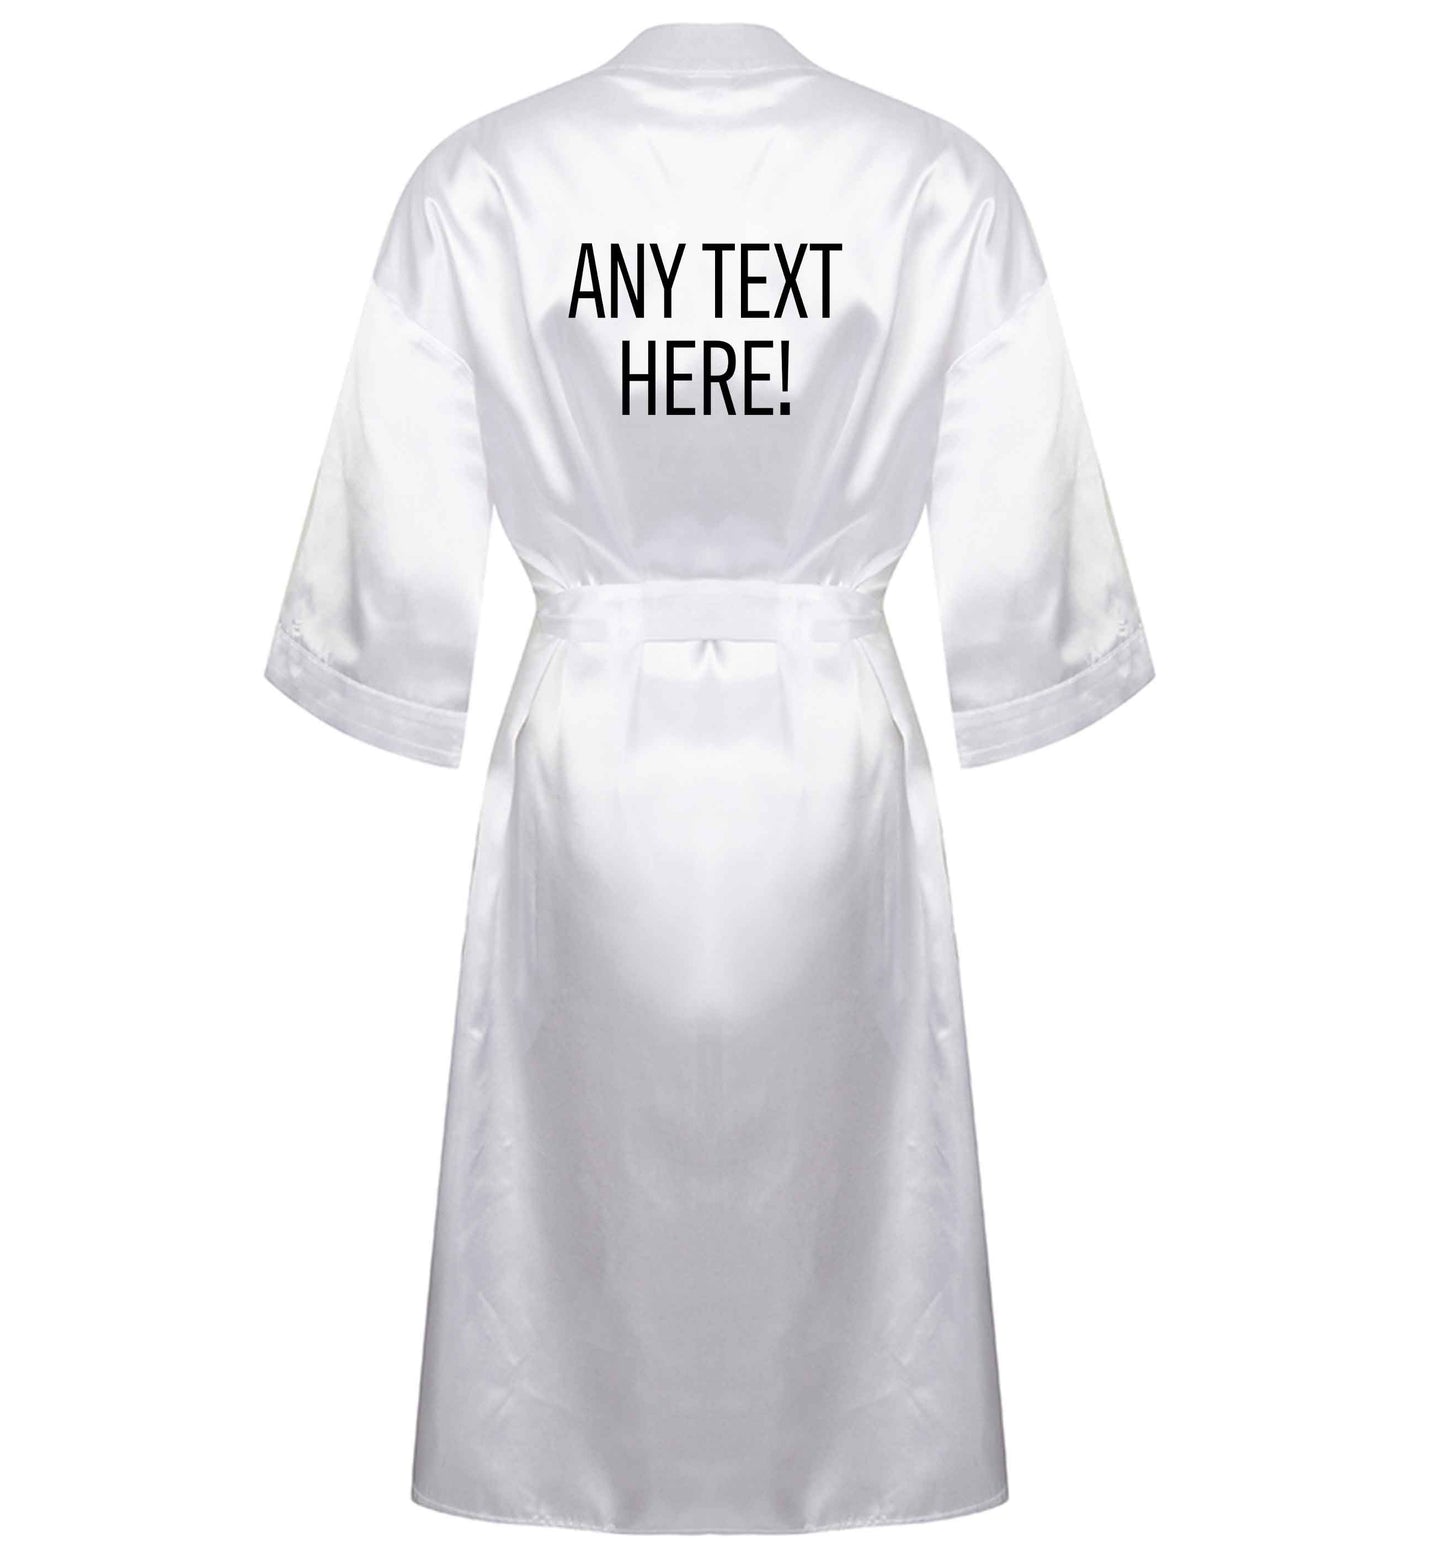 Happy Easter - personalised XL/XXL white ladies dressing gown size 16/18